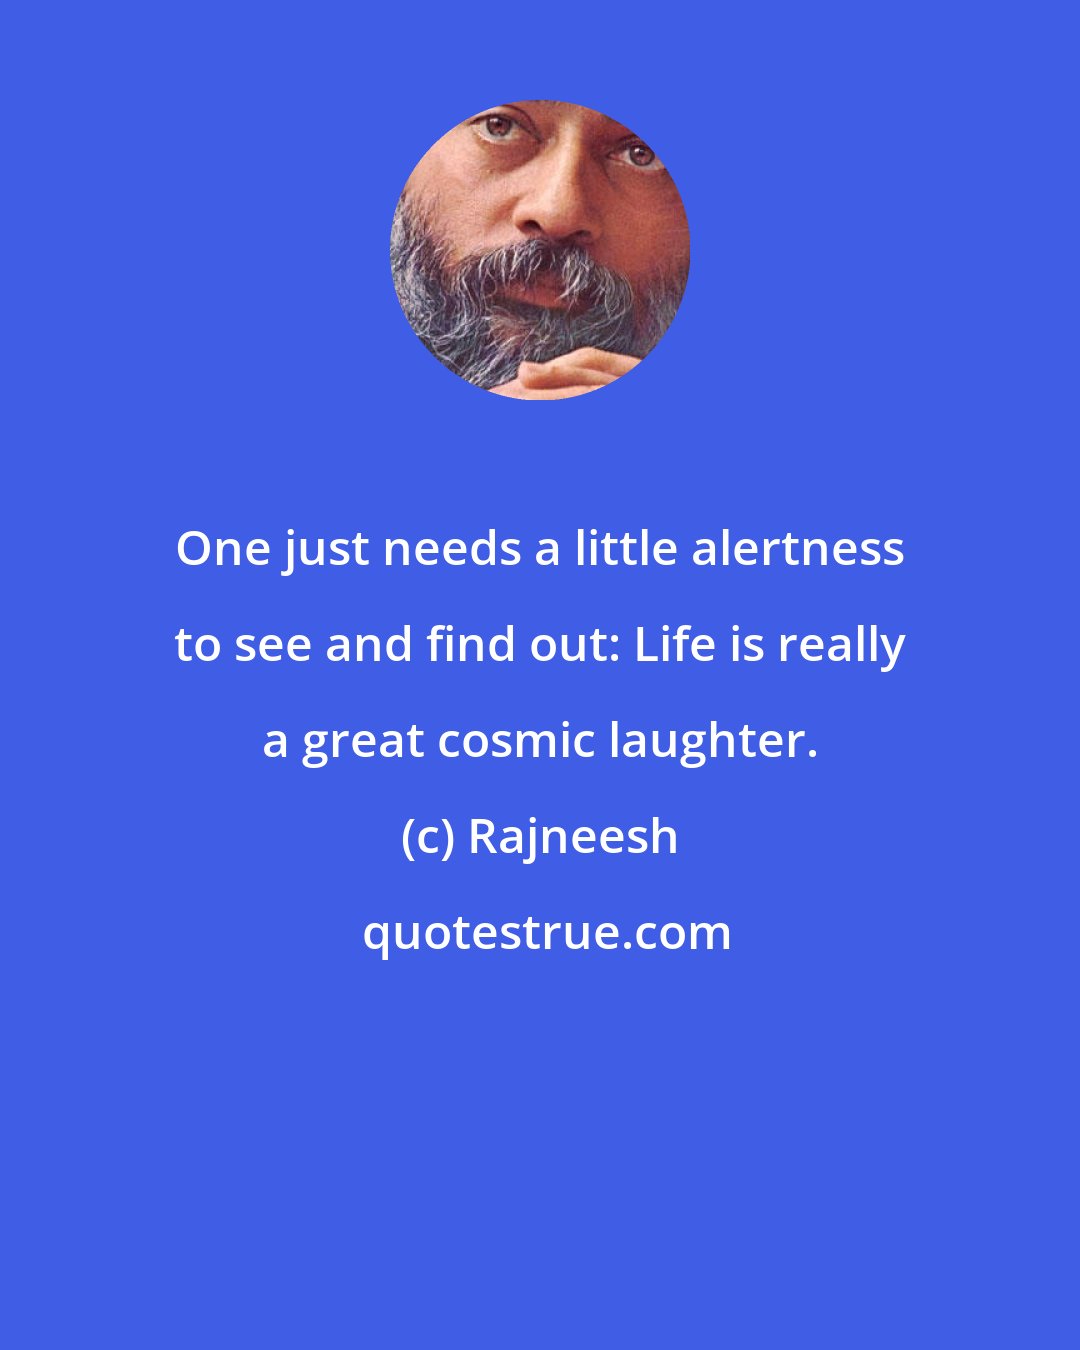 Rajneesh: One just needs a little alertness to see and find out: Life is really a great cosmic laughter.